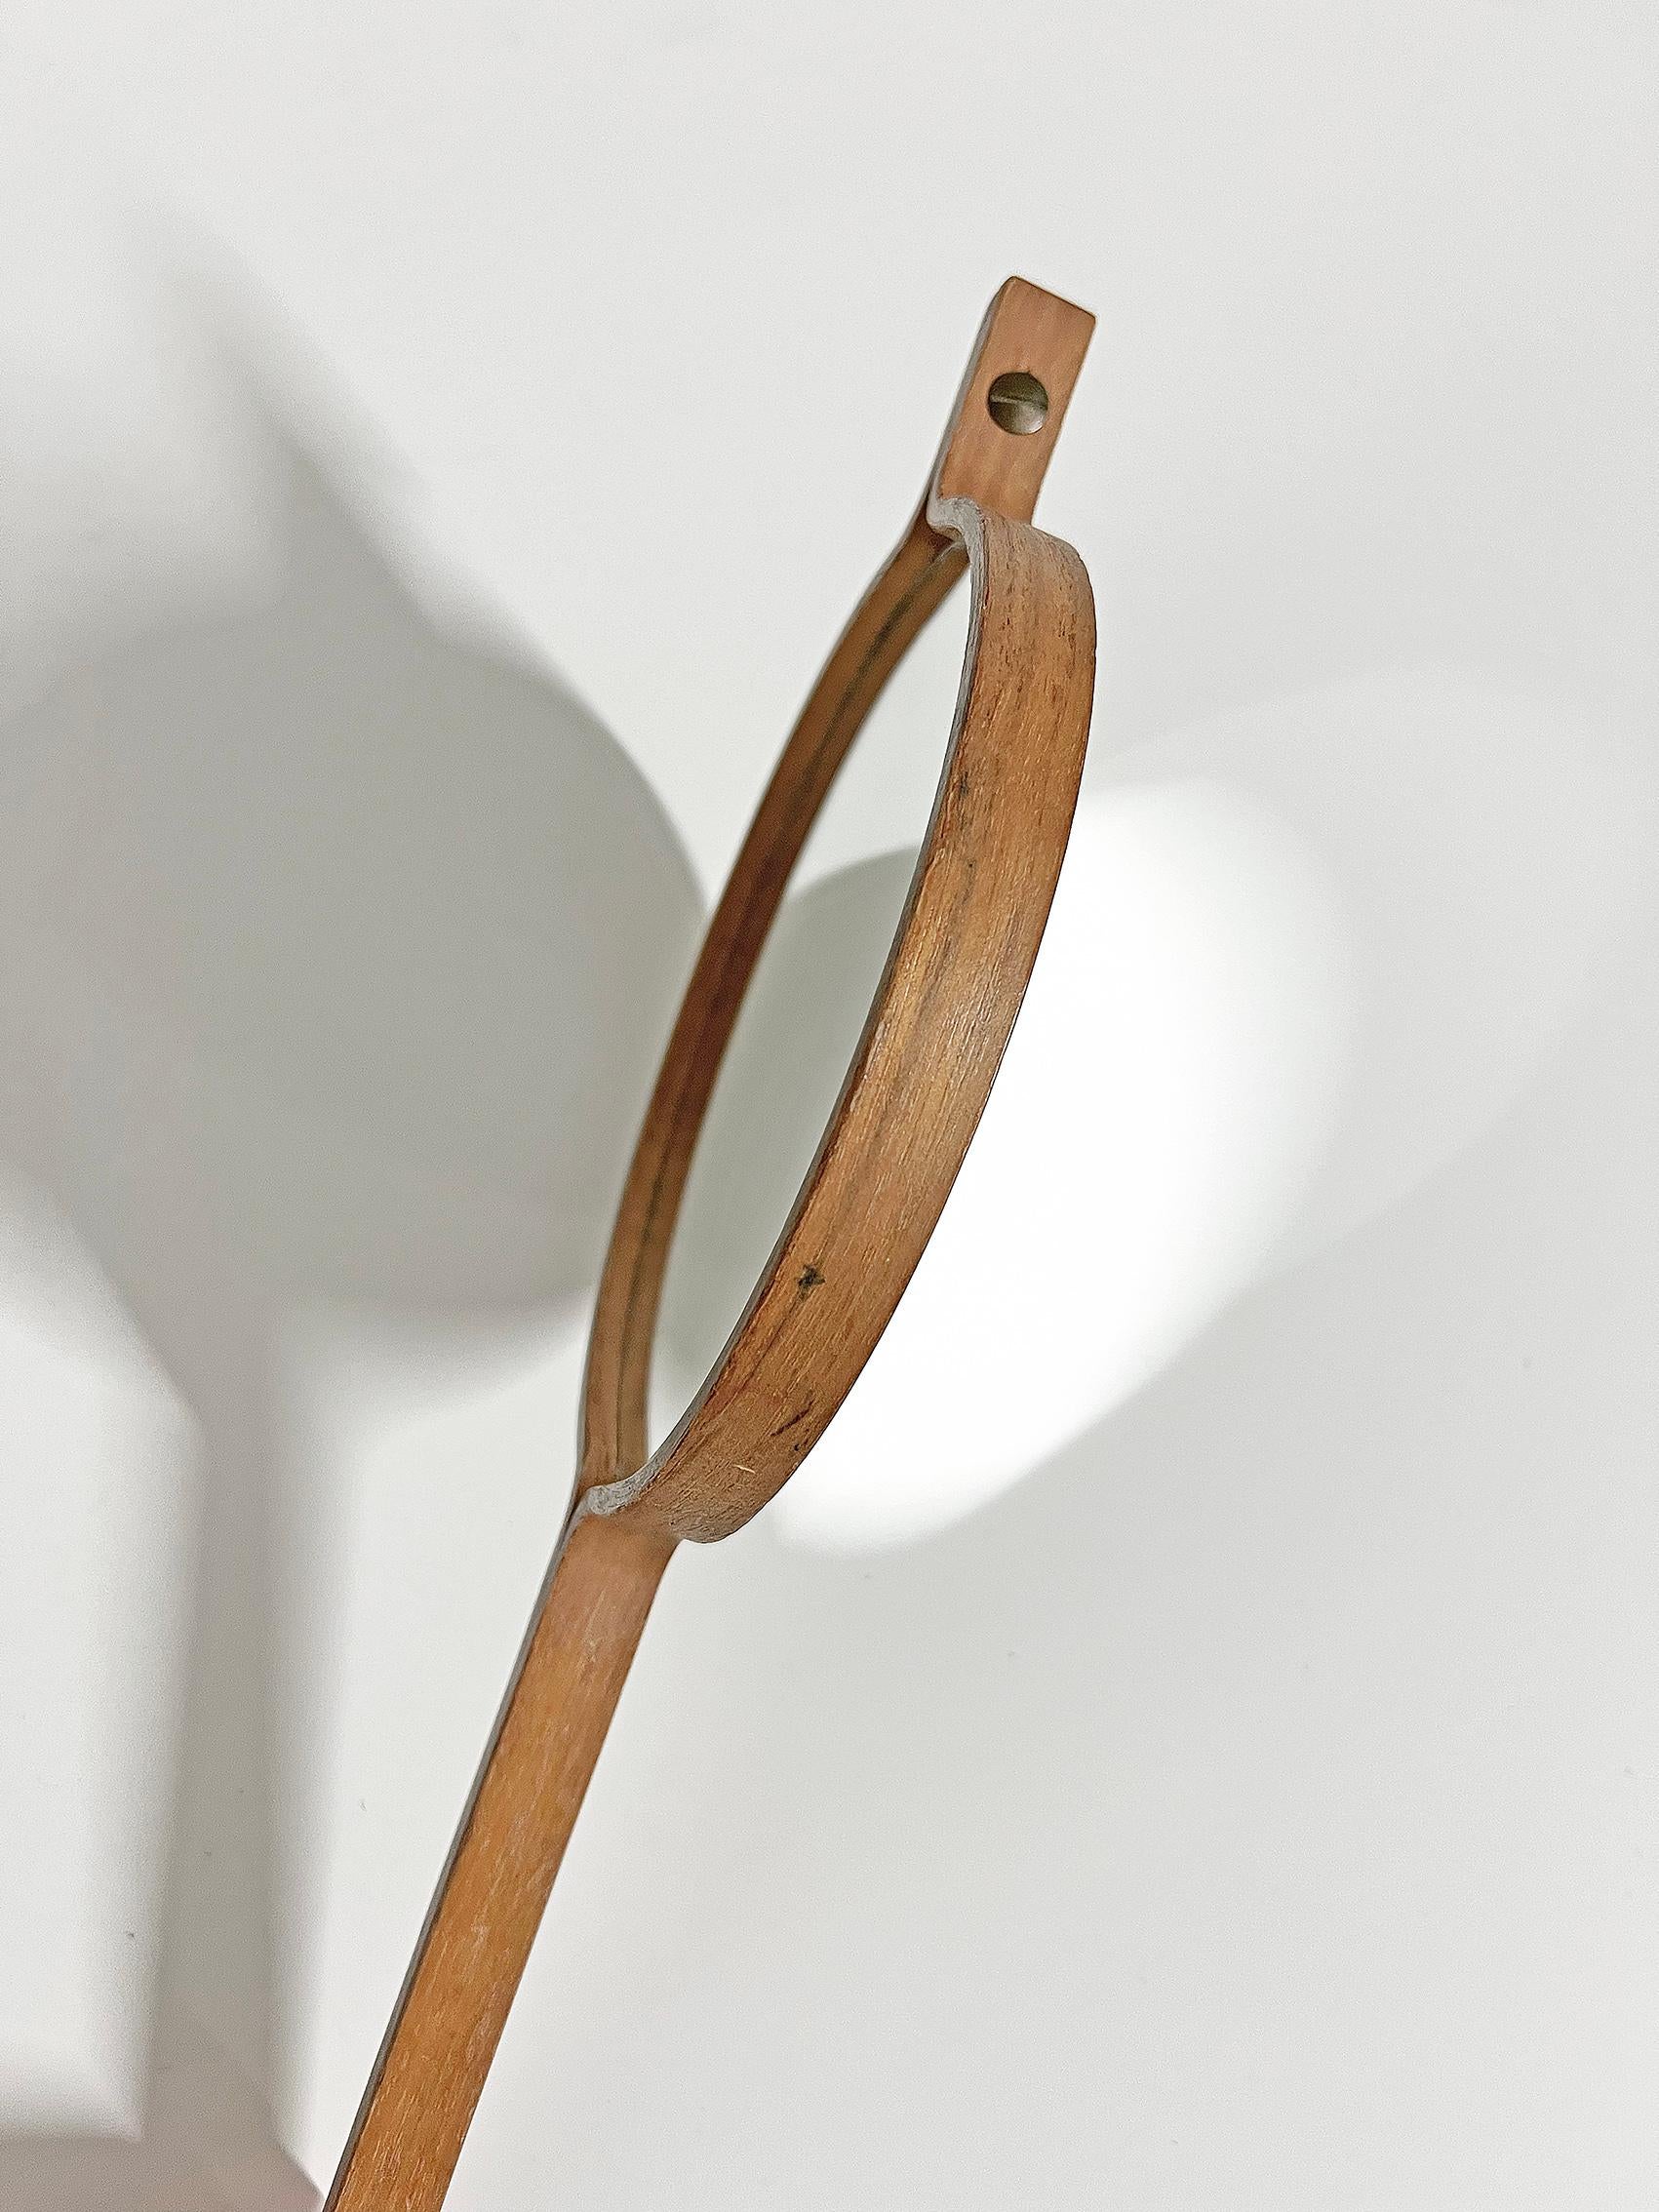 Hand/Wall Mirror in Teak by Bech & Starup Denmark -1960s For Sale 1